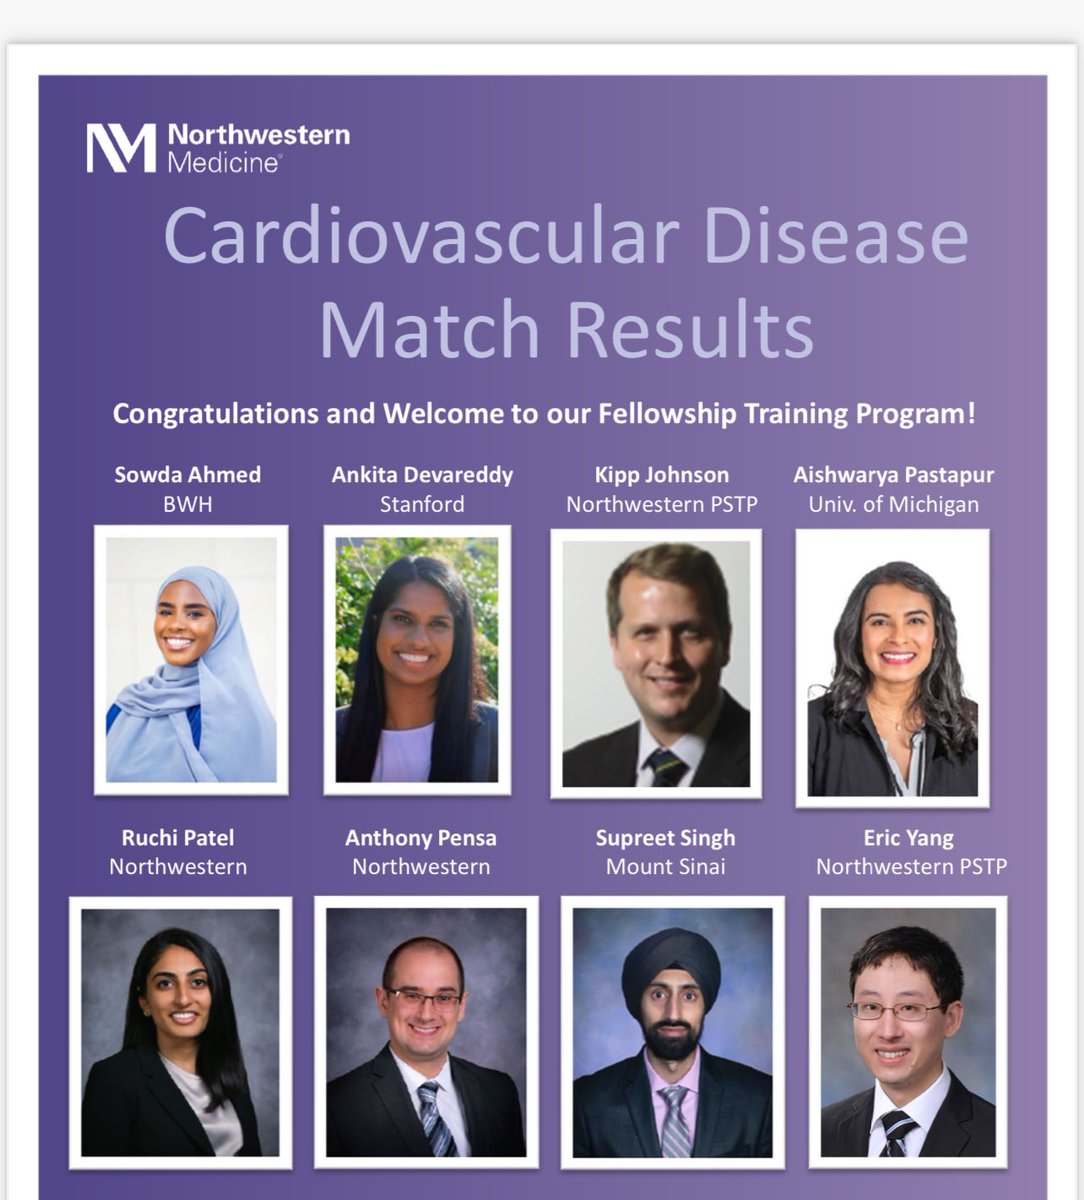 We are elated! See this spectacular class of future cardiologists & scientists @NMCardioVasc @WeAreNUHeart @NUFeinbergMed @NorthwesternMed - to all newly matched cardiology fellows across the U.S., welcome to our community. You inspire us. Find your niche; #MakeADifference 👏🏽👏🏽👏🏽